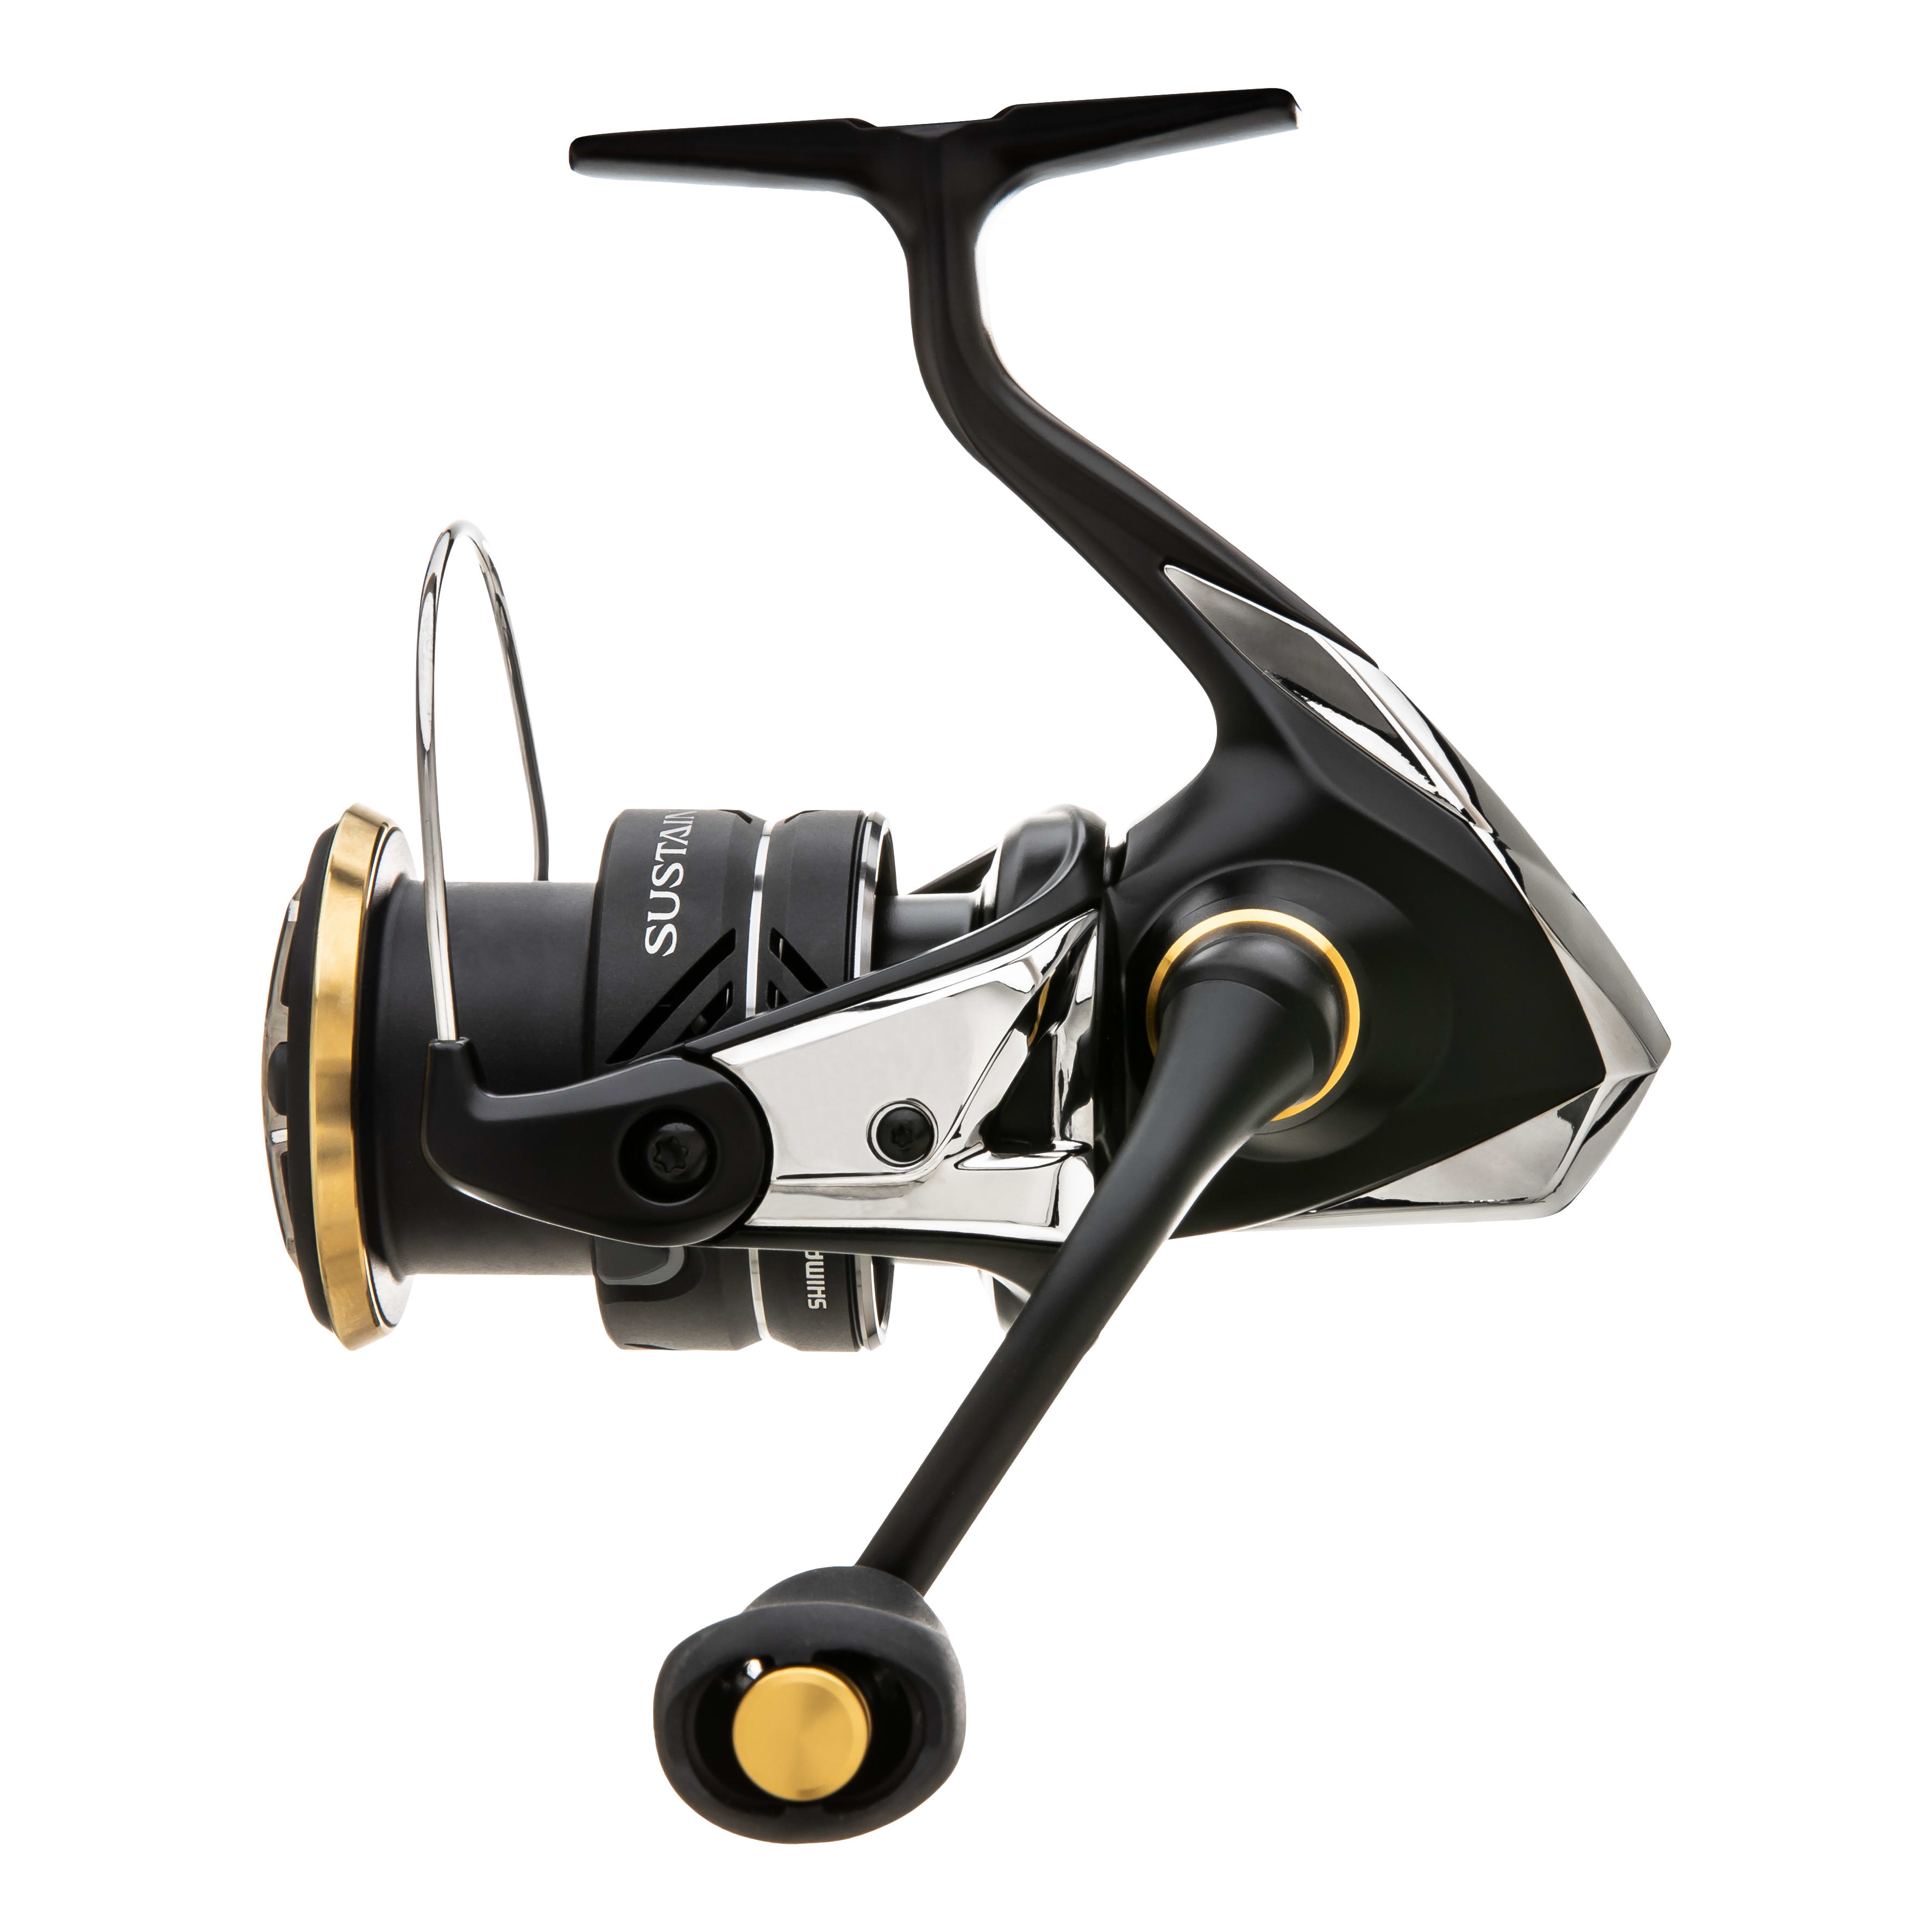 Clearance Event: Fresh Shimano Vanford 2500 HG Spinning Reel